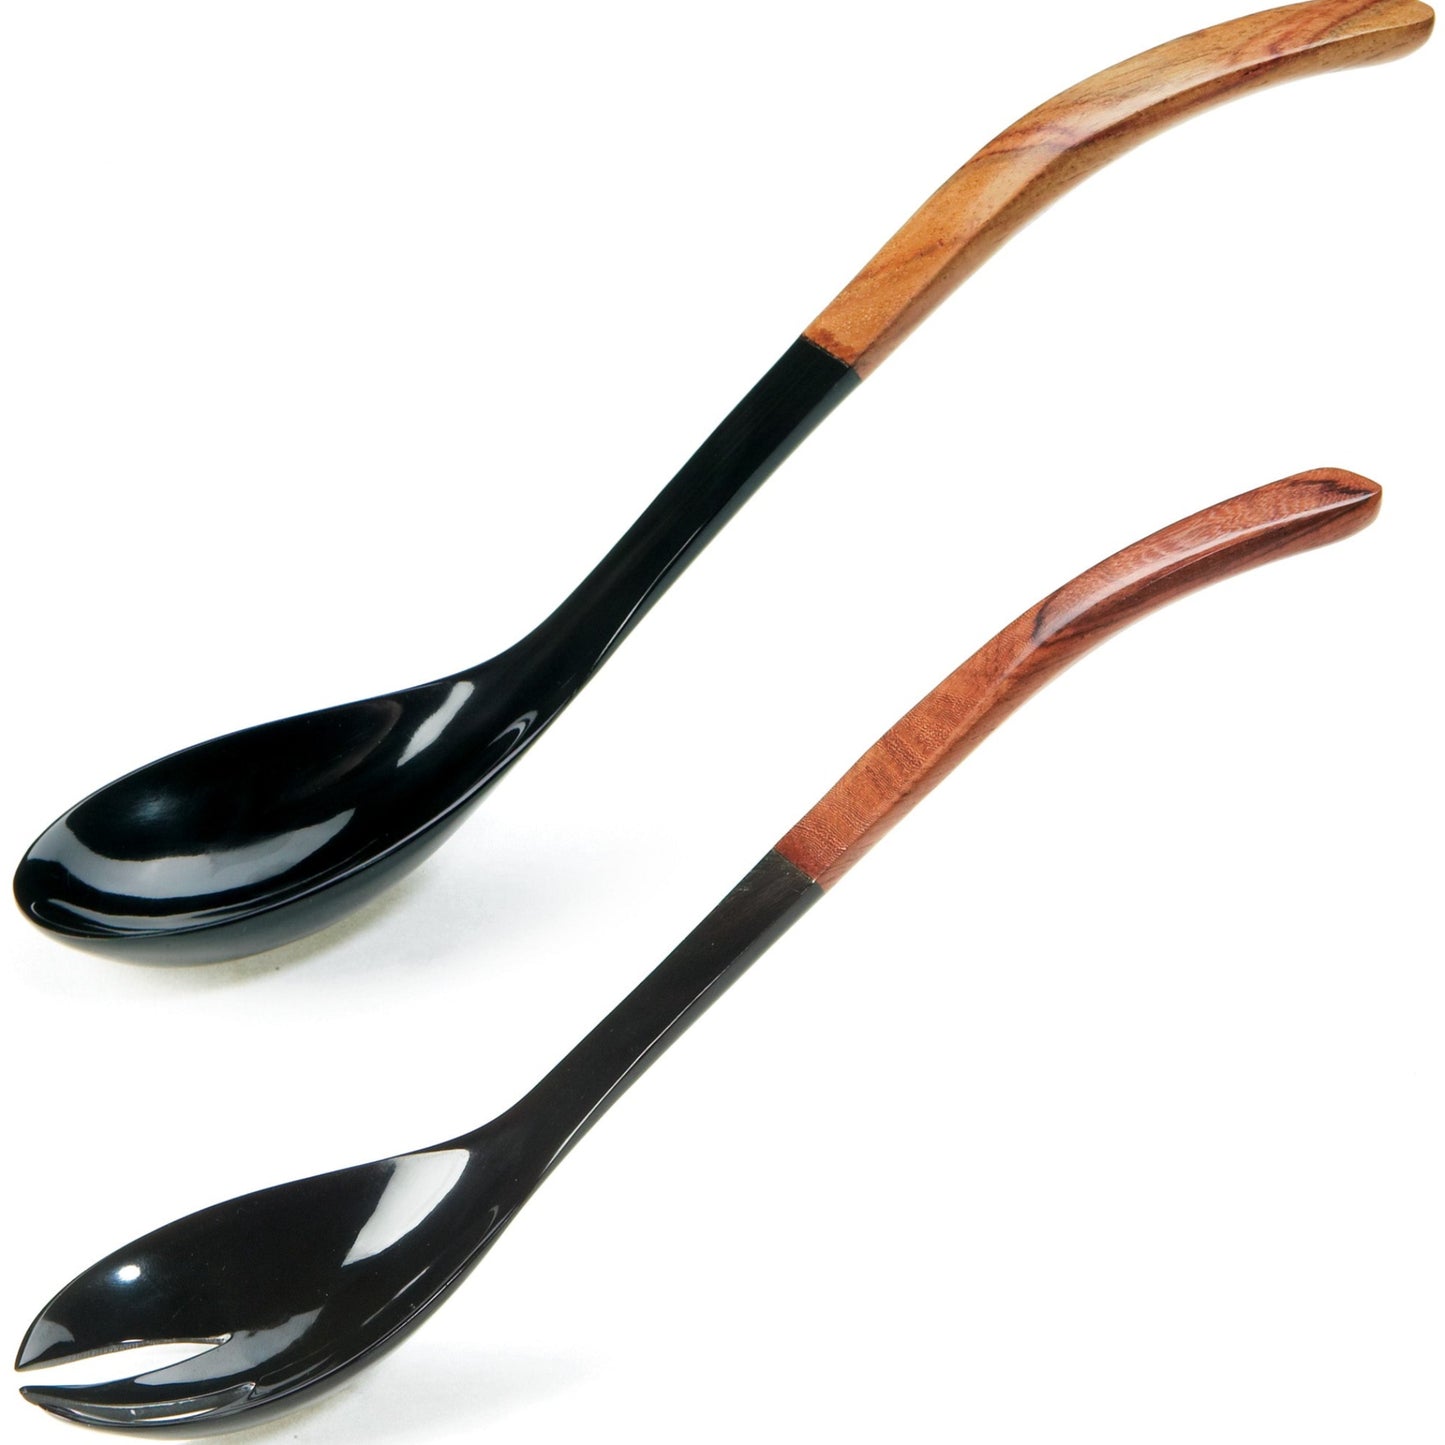 Curved Salad Servers with Rosewood Handles